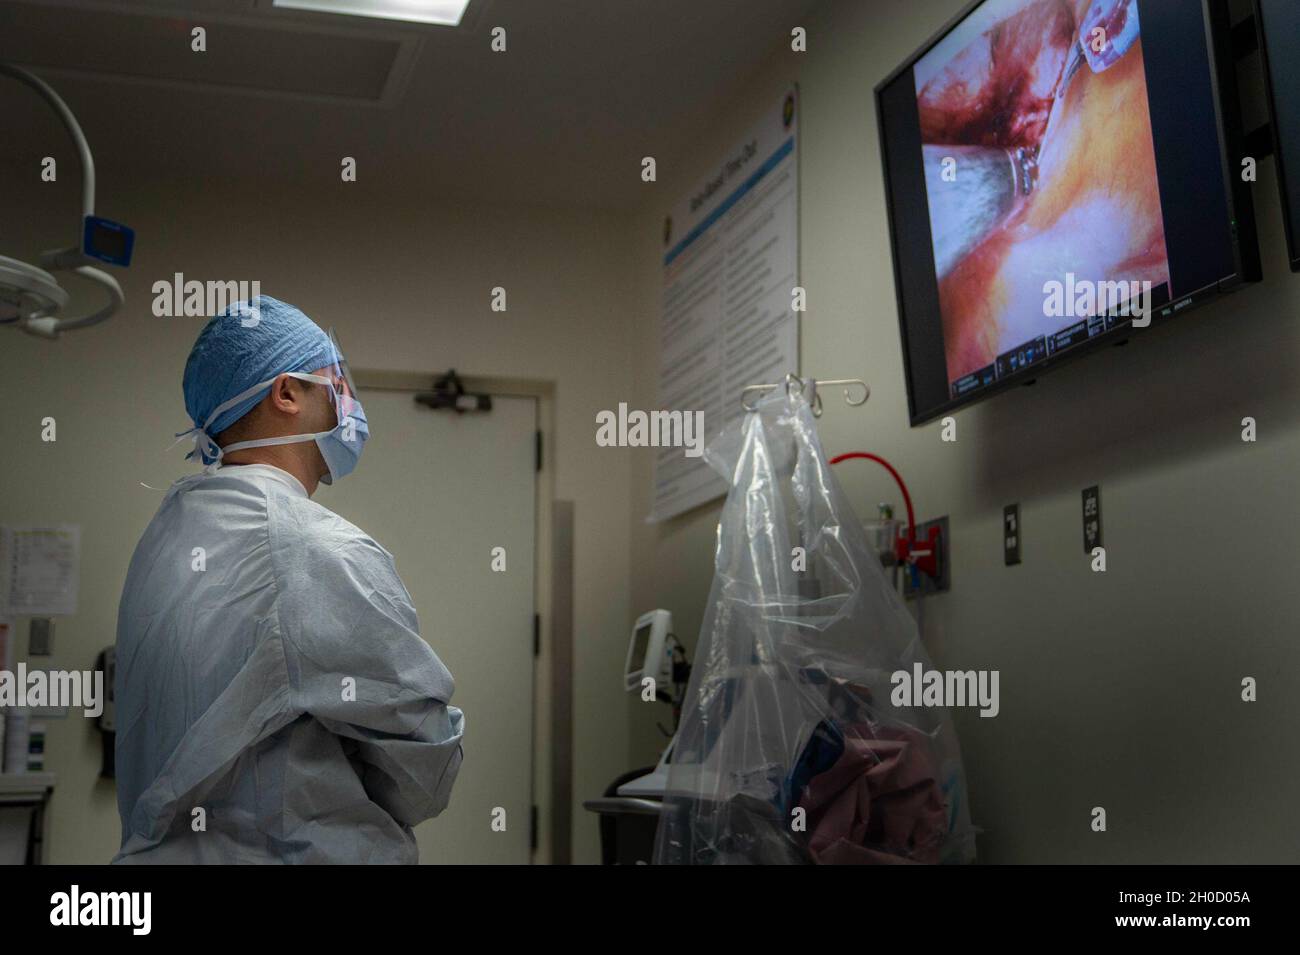 210127-N-LW757-1057  SAN DIEGO (Jan. 27, 2020) Ens. Trung Ho, a Uniform Services University of the Health Sciences student, observes a robotic-assisted laparoscopic inguinal hernia repair procedure in one of the hospital's operating rooms Jan. 27. Robotic surgical systems, like those used at NMCSD, allow surgeons to perform minimally-invasive procedures, and this procedure was performed during a remote, tele-mentoring study. NMCSD’s mission is to prepare service members to deploy in support of operational forces, deliver high quality healthcare services and shape the future of military medicin Stock Photo